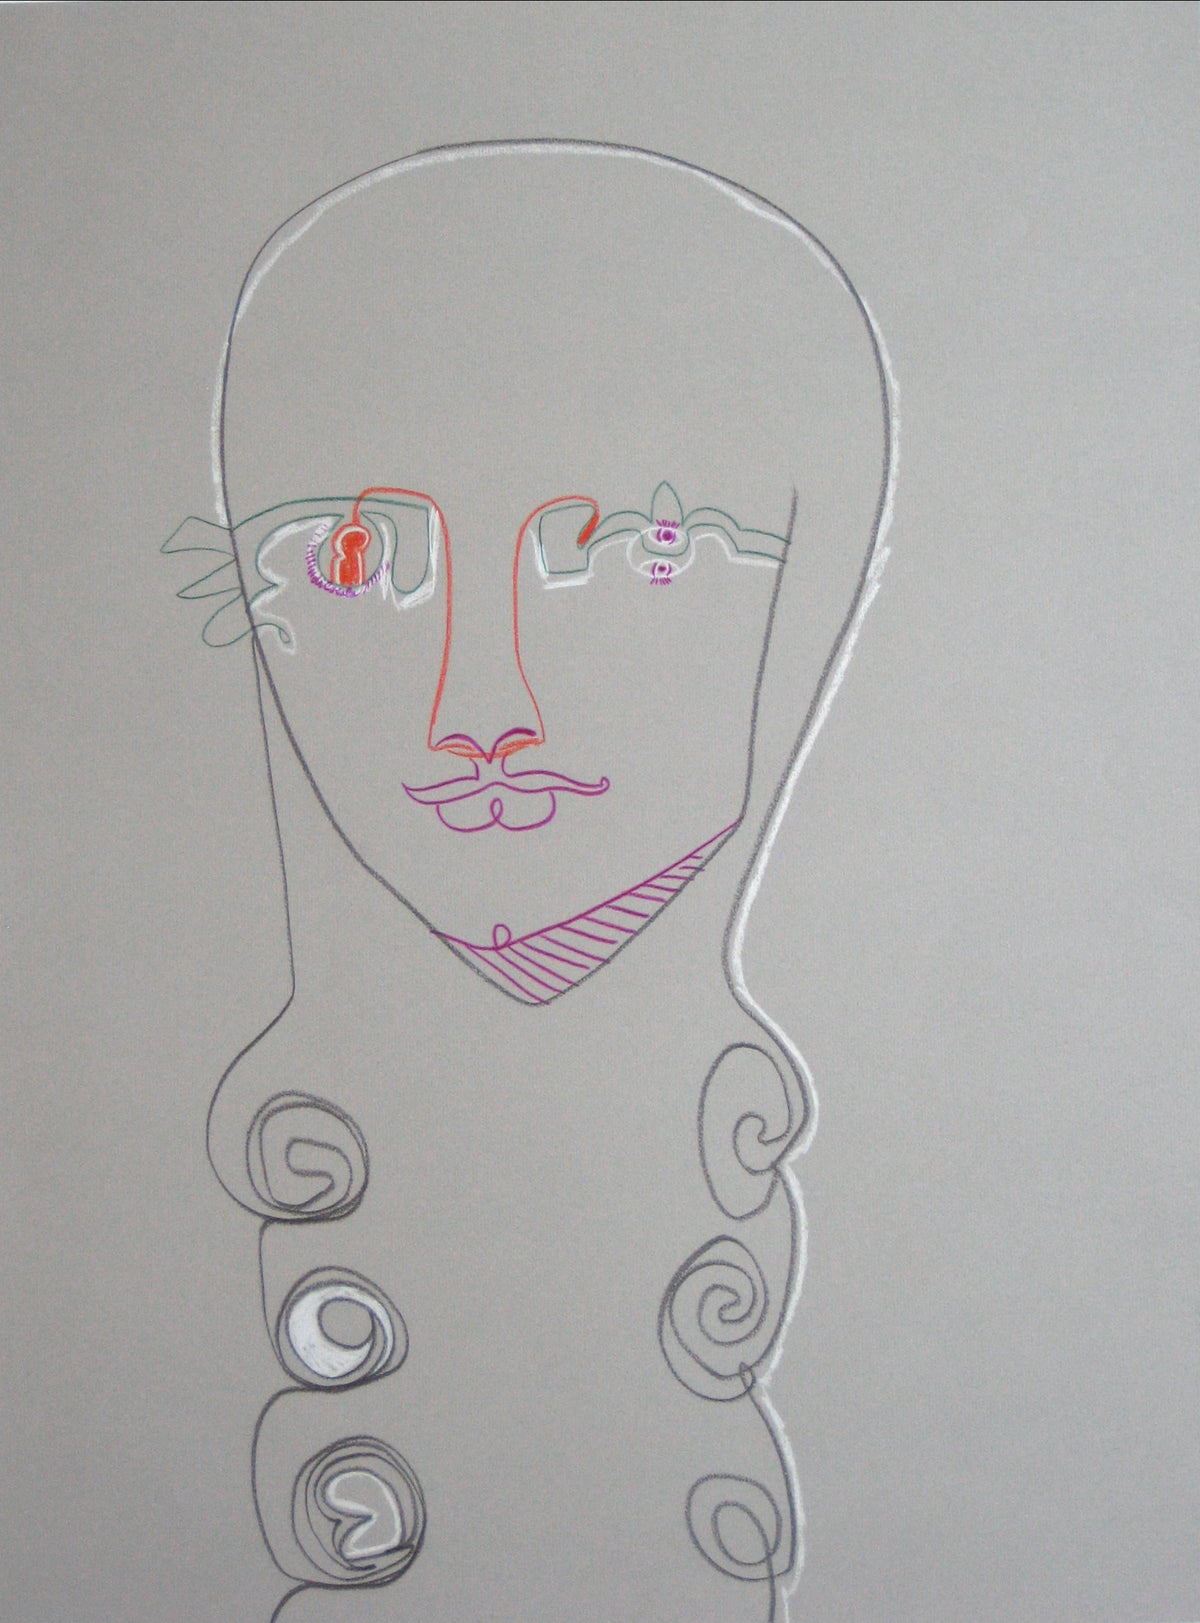 Surreal Figure with Swirls &lt;br&gt;20th Century Pastel &amp; Colored Pencil &lt;br&gt;&lt;br&gt;#17029